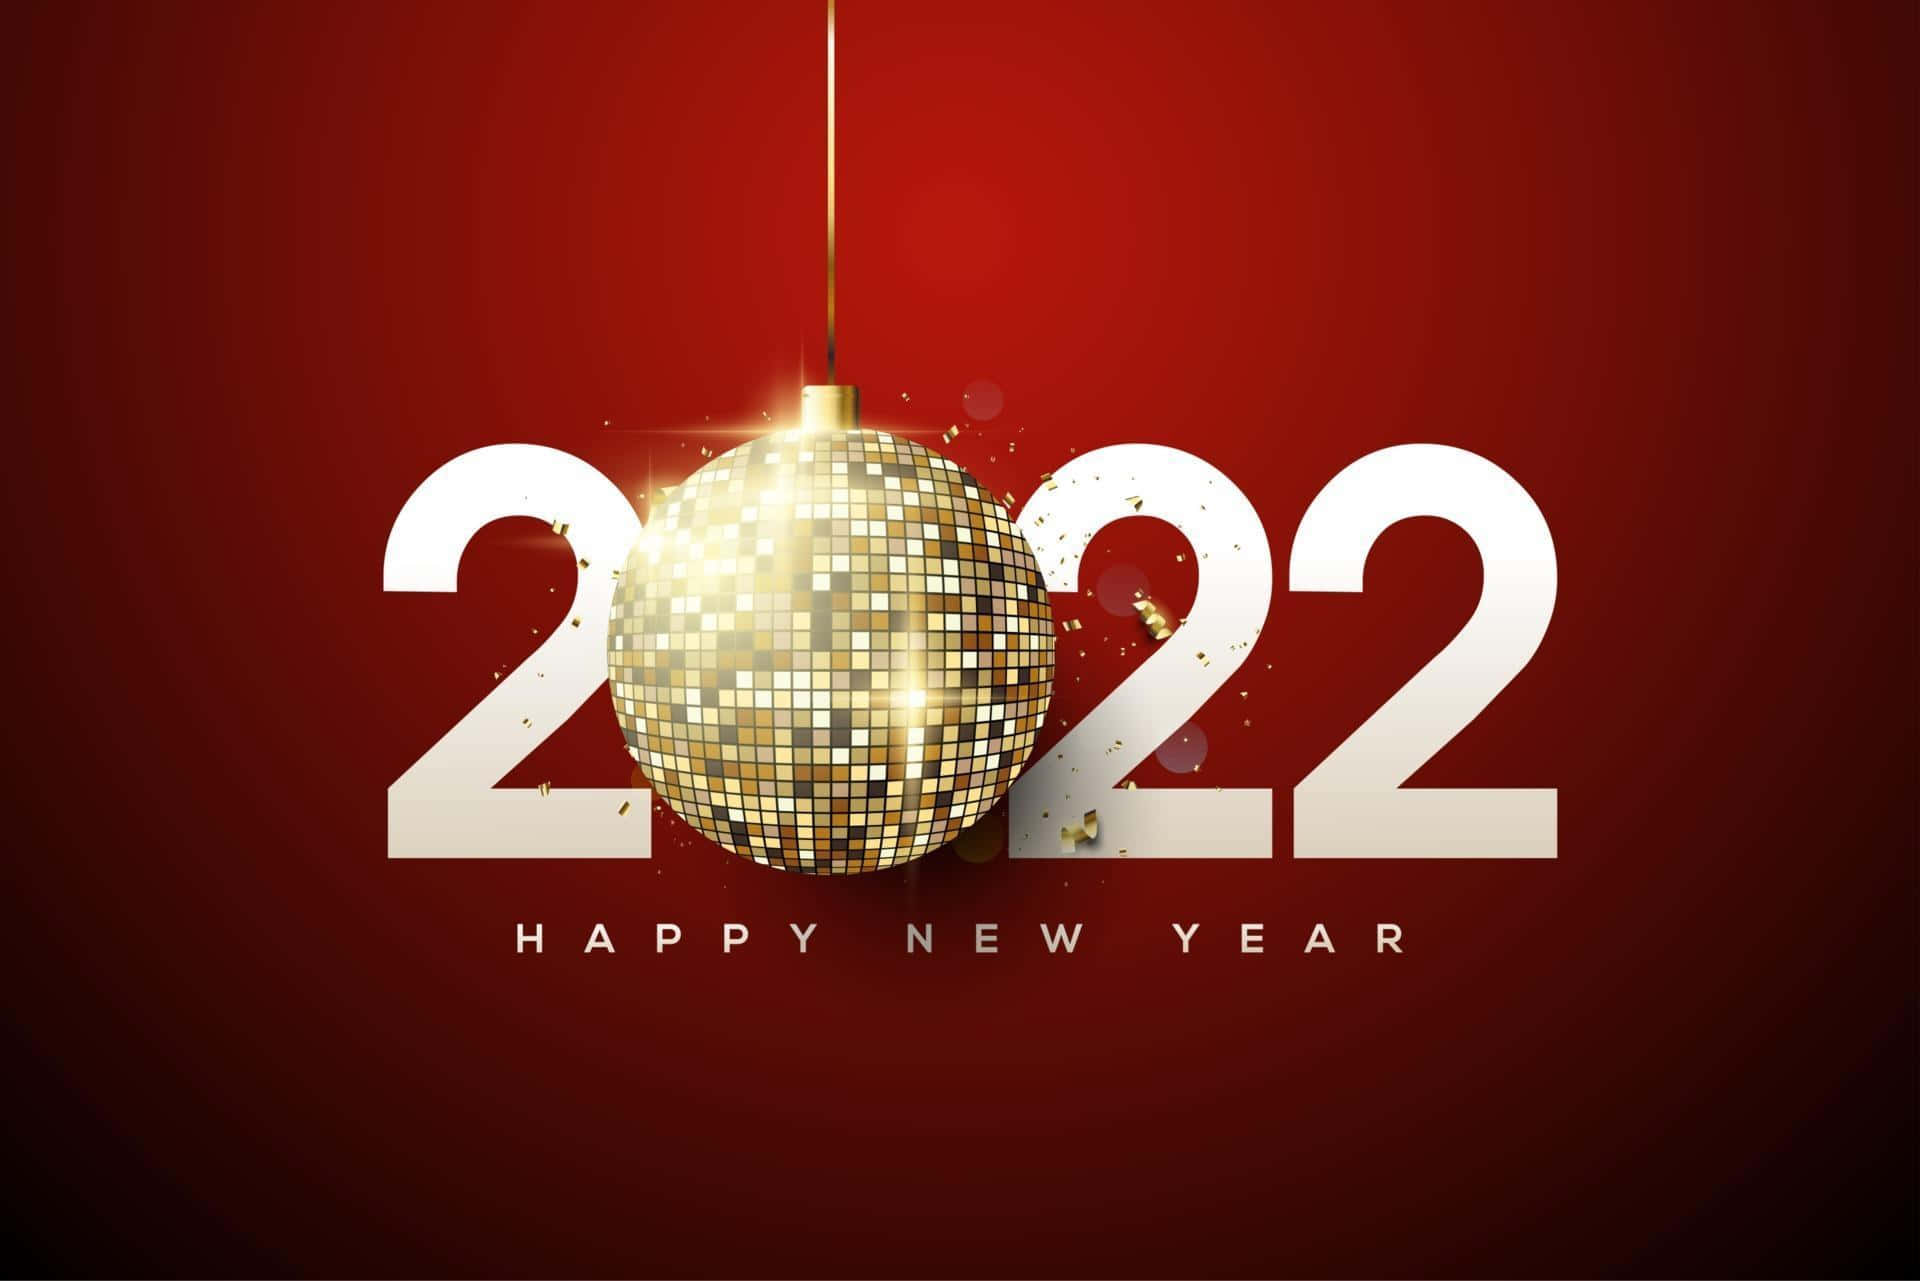 Welcome the Year 2022 with Joy and Hope